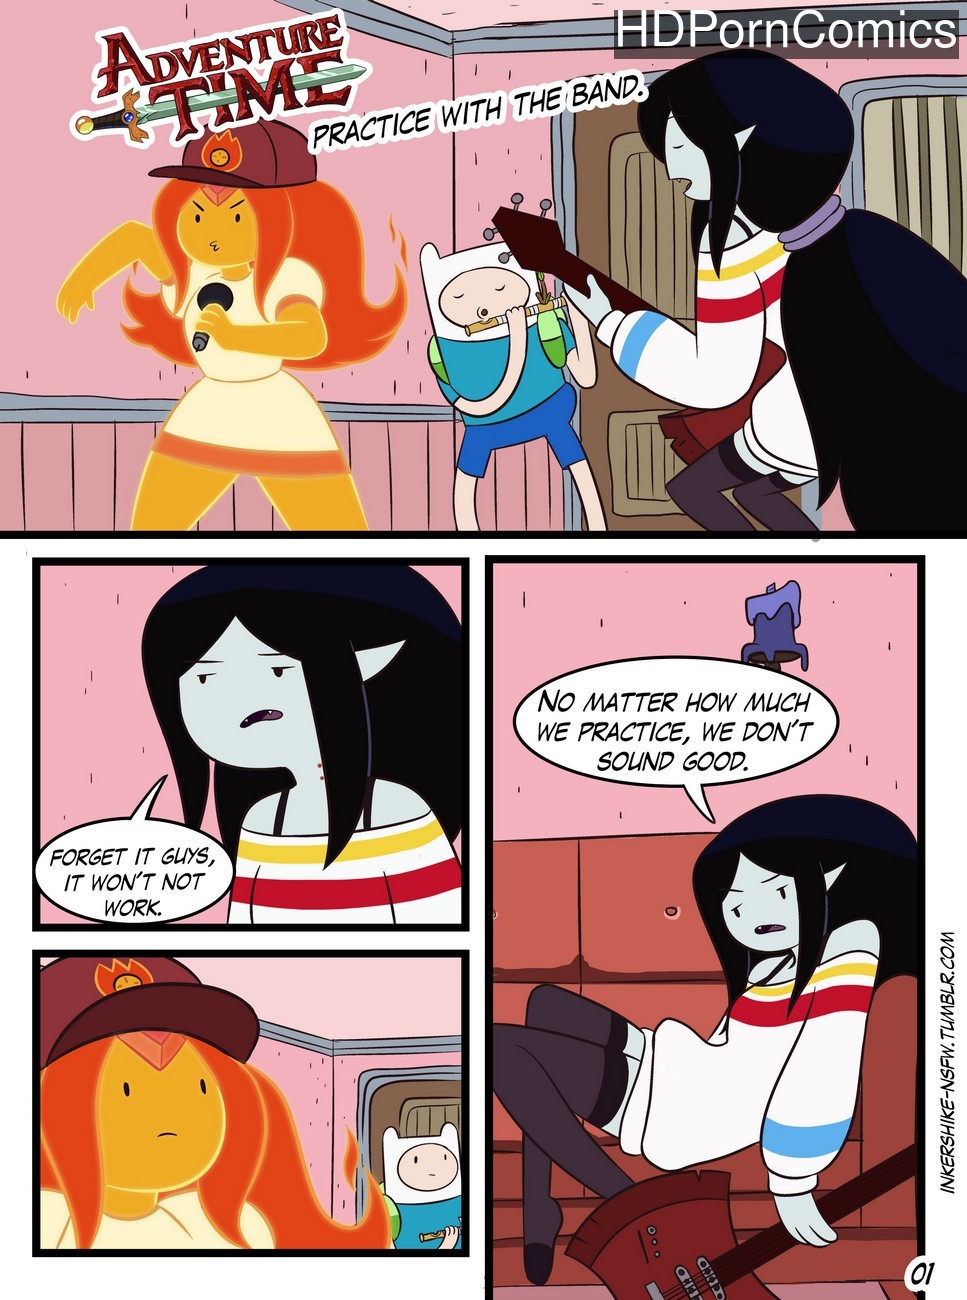 Adventure Time College - Adventure Time - Practice With The Band comic porn | HD Porn Comics